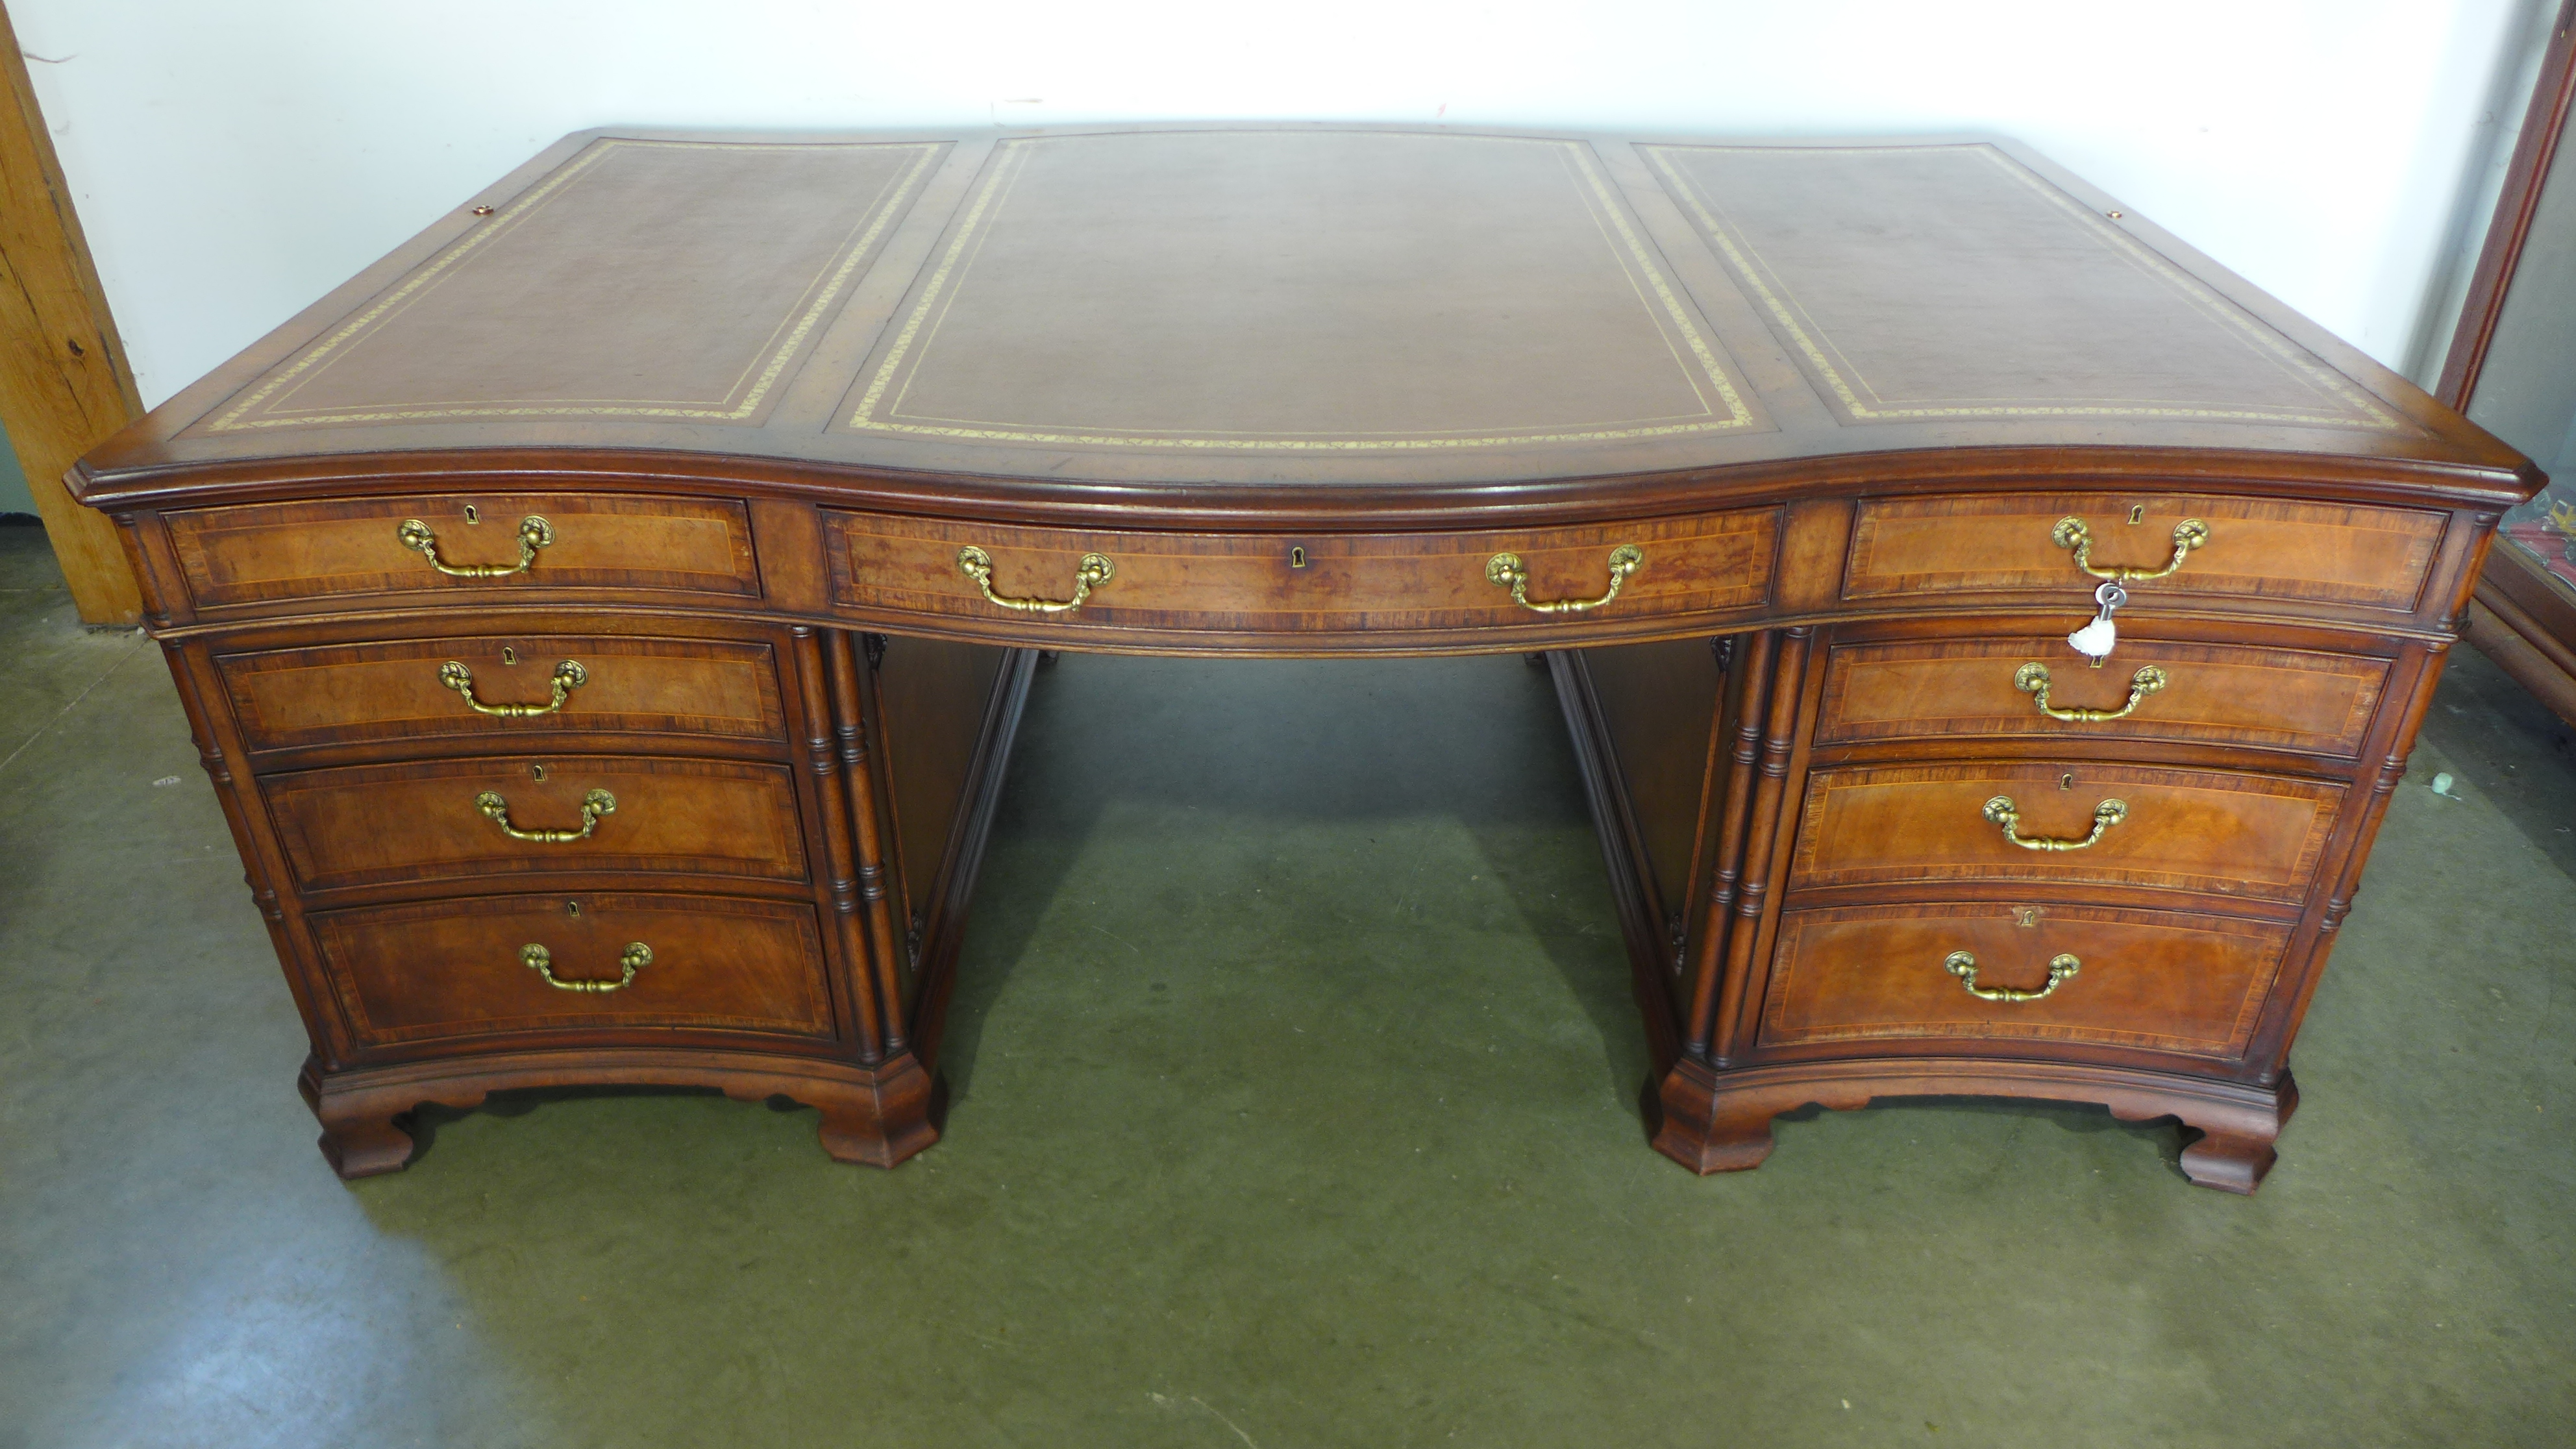 A good quality 20th century walnut and rosewood crossbanded serpentine fronted partners desk with